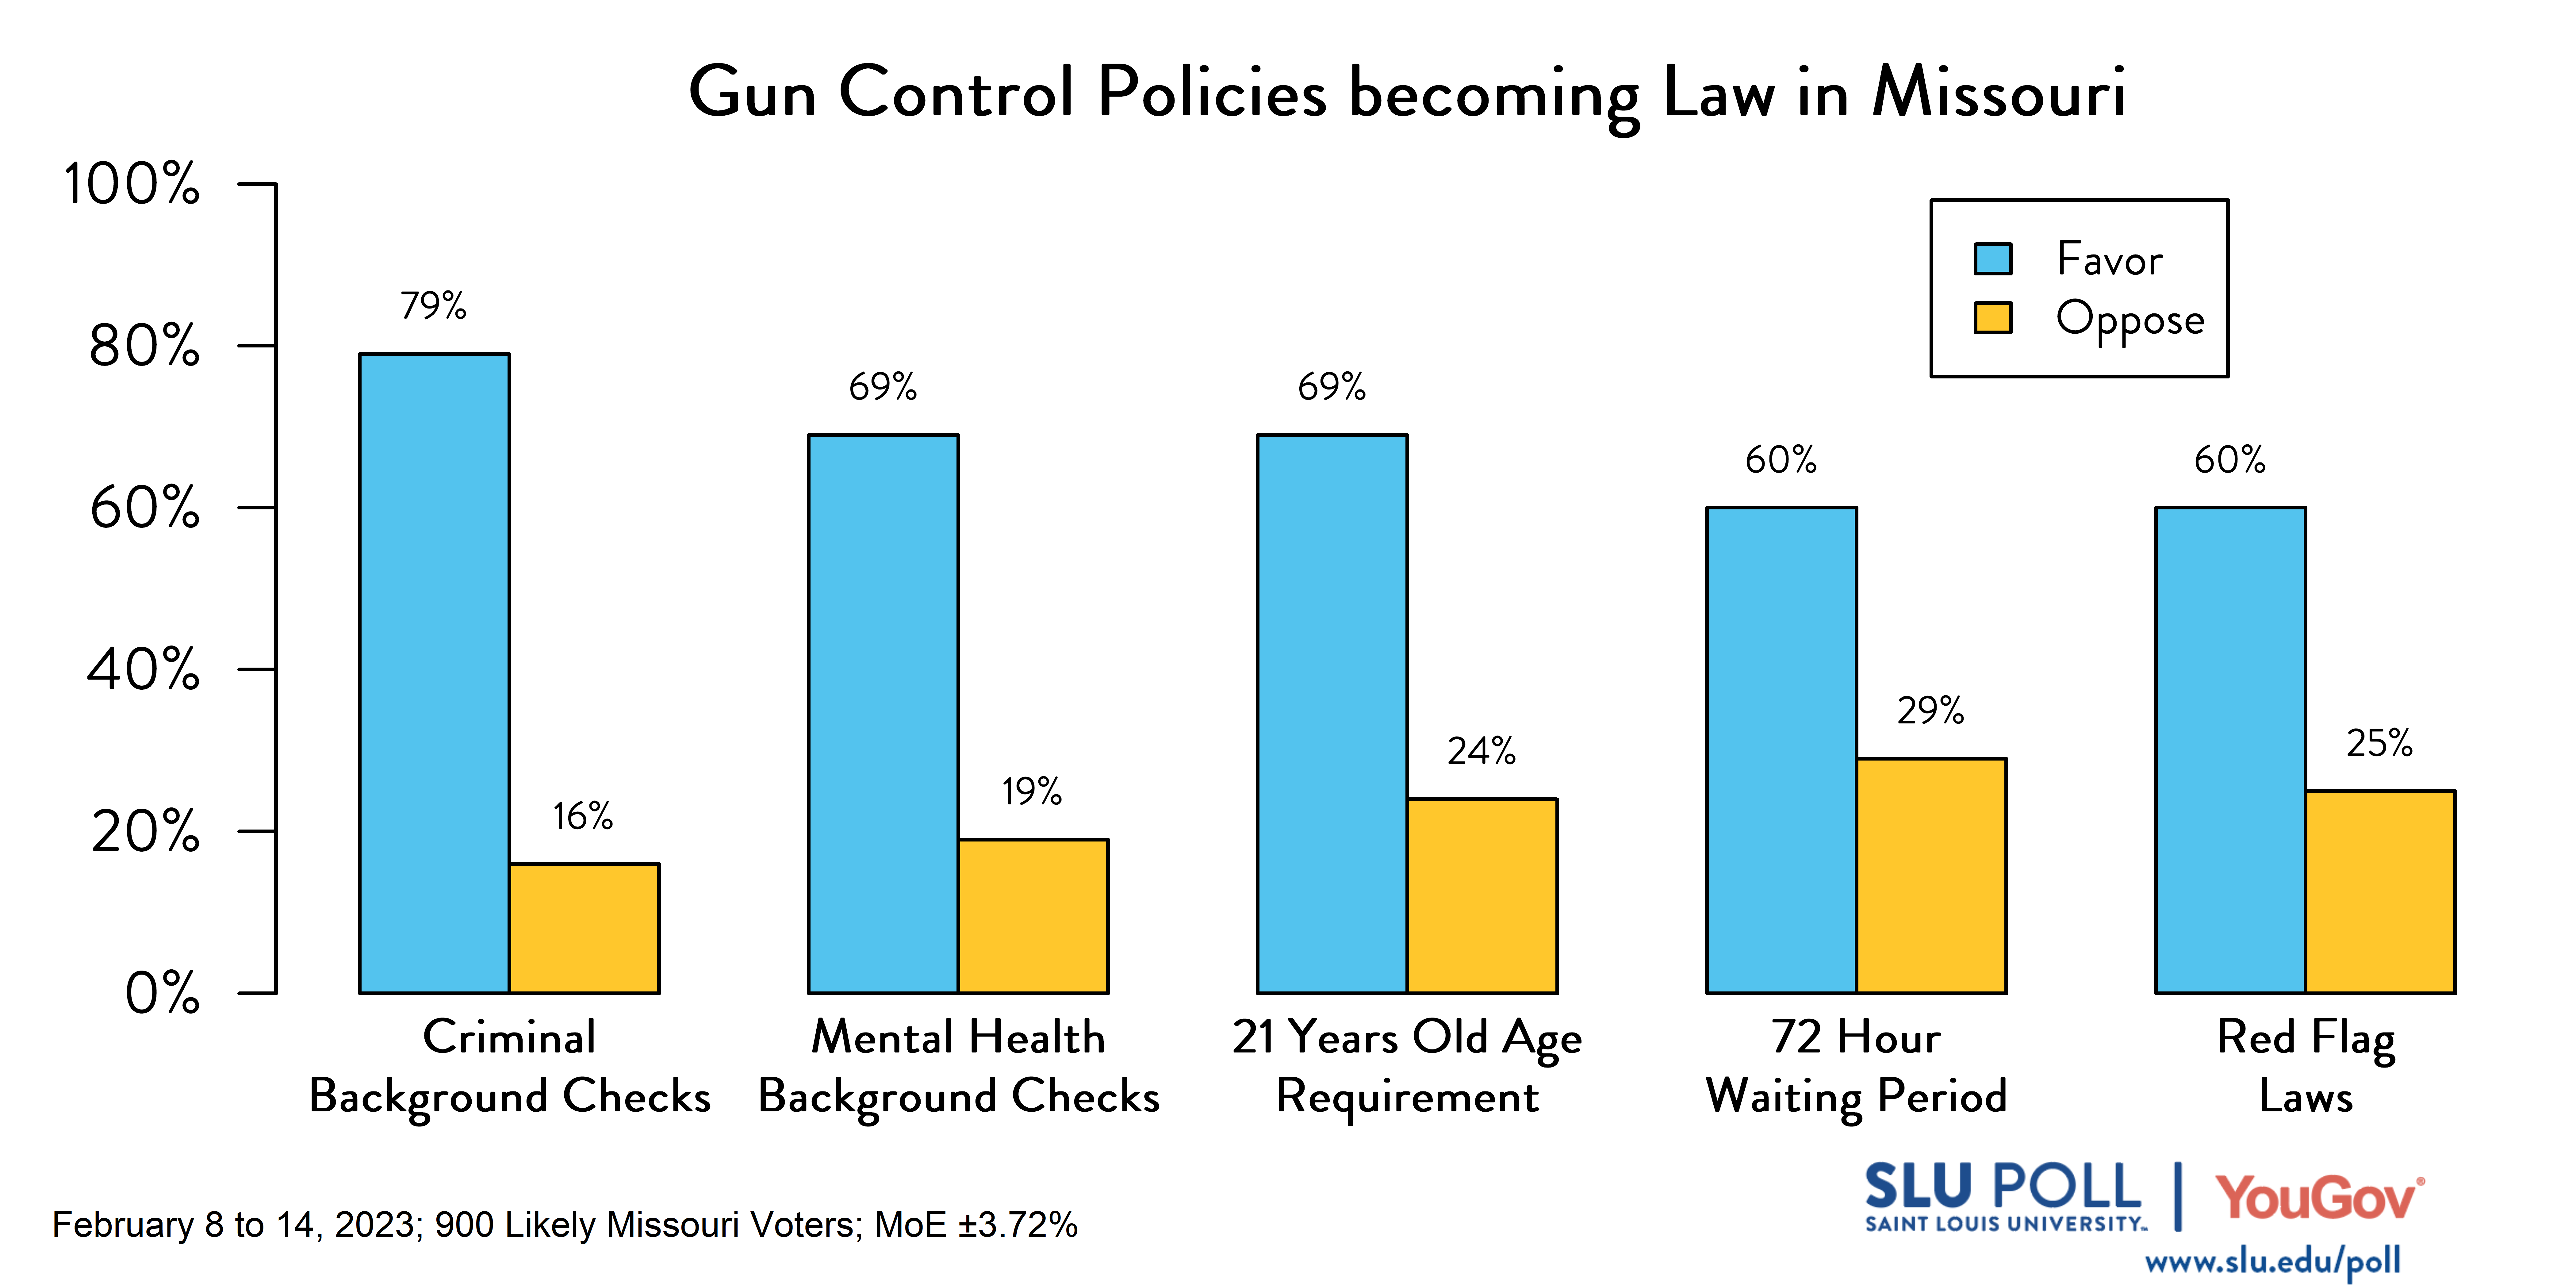 Likely voters' responses to 'Do you favor or oppose the following gun policies becoming law in Missouri: Requiring criminal background checks for all those buying guns, including at gun shows and private sales?': 79% Favor, 16% Oppose. Likely voters' responses to 'Do you favor or oppose the following gun policies becoming law in Missouri: Requiring mental health background checks for all those buying guns, including at gun shows and private sales?': 69% Favor, 19% Oppose. Likely voters' responses to 'Do you favor or oppose the following gun policies becoming law in Missouri: Requiring people to be 21 years old before purchasing a gun?': 69% Favor, 24% Oppose. Likely voters' responses to 'Do you favor or oppose the following gun policies becoming law in Missouri: Requiring people who purchase handguns to wait 72 hours before they receive that gun?': 60% Favor, 29% Oppose. Likely voters' responses to 'Do you favor or oppose the following gun policies becoming law in Missouri: Red flag laws that allow a court to temporarily remove guns from people that are believed to pose a danger to themself or others?': 60% Favor, 25% Oppose.